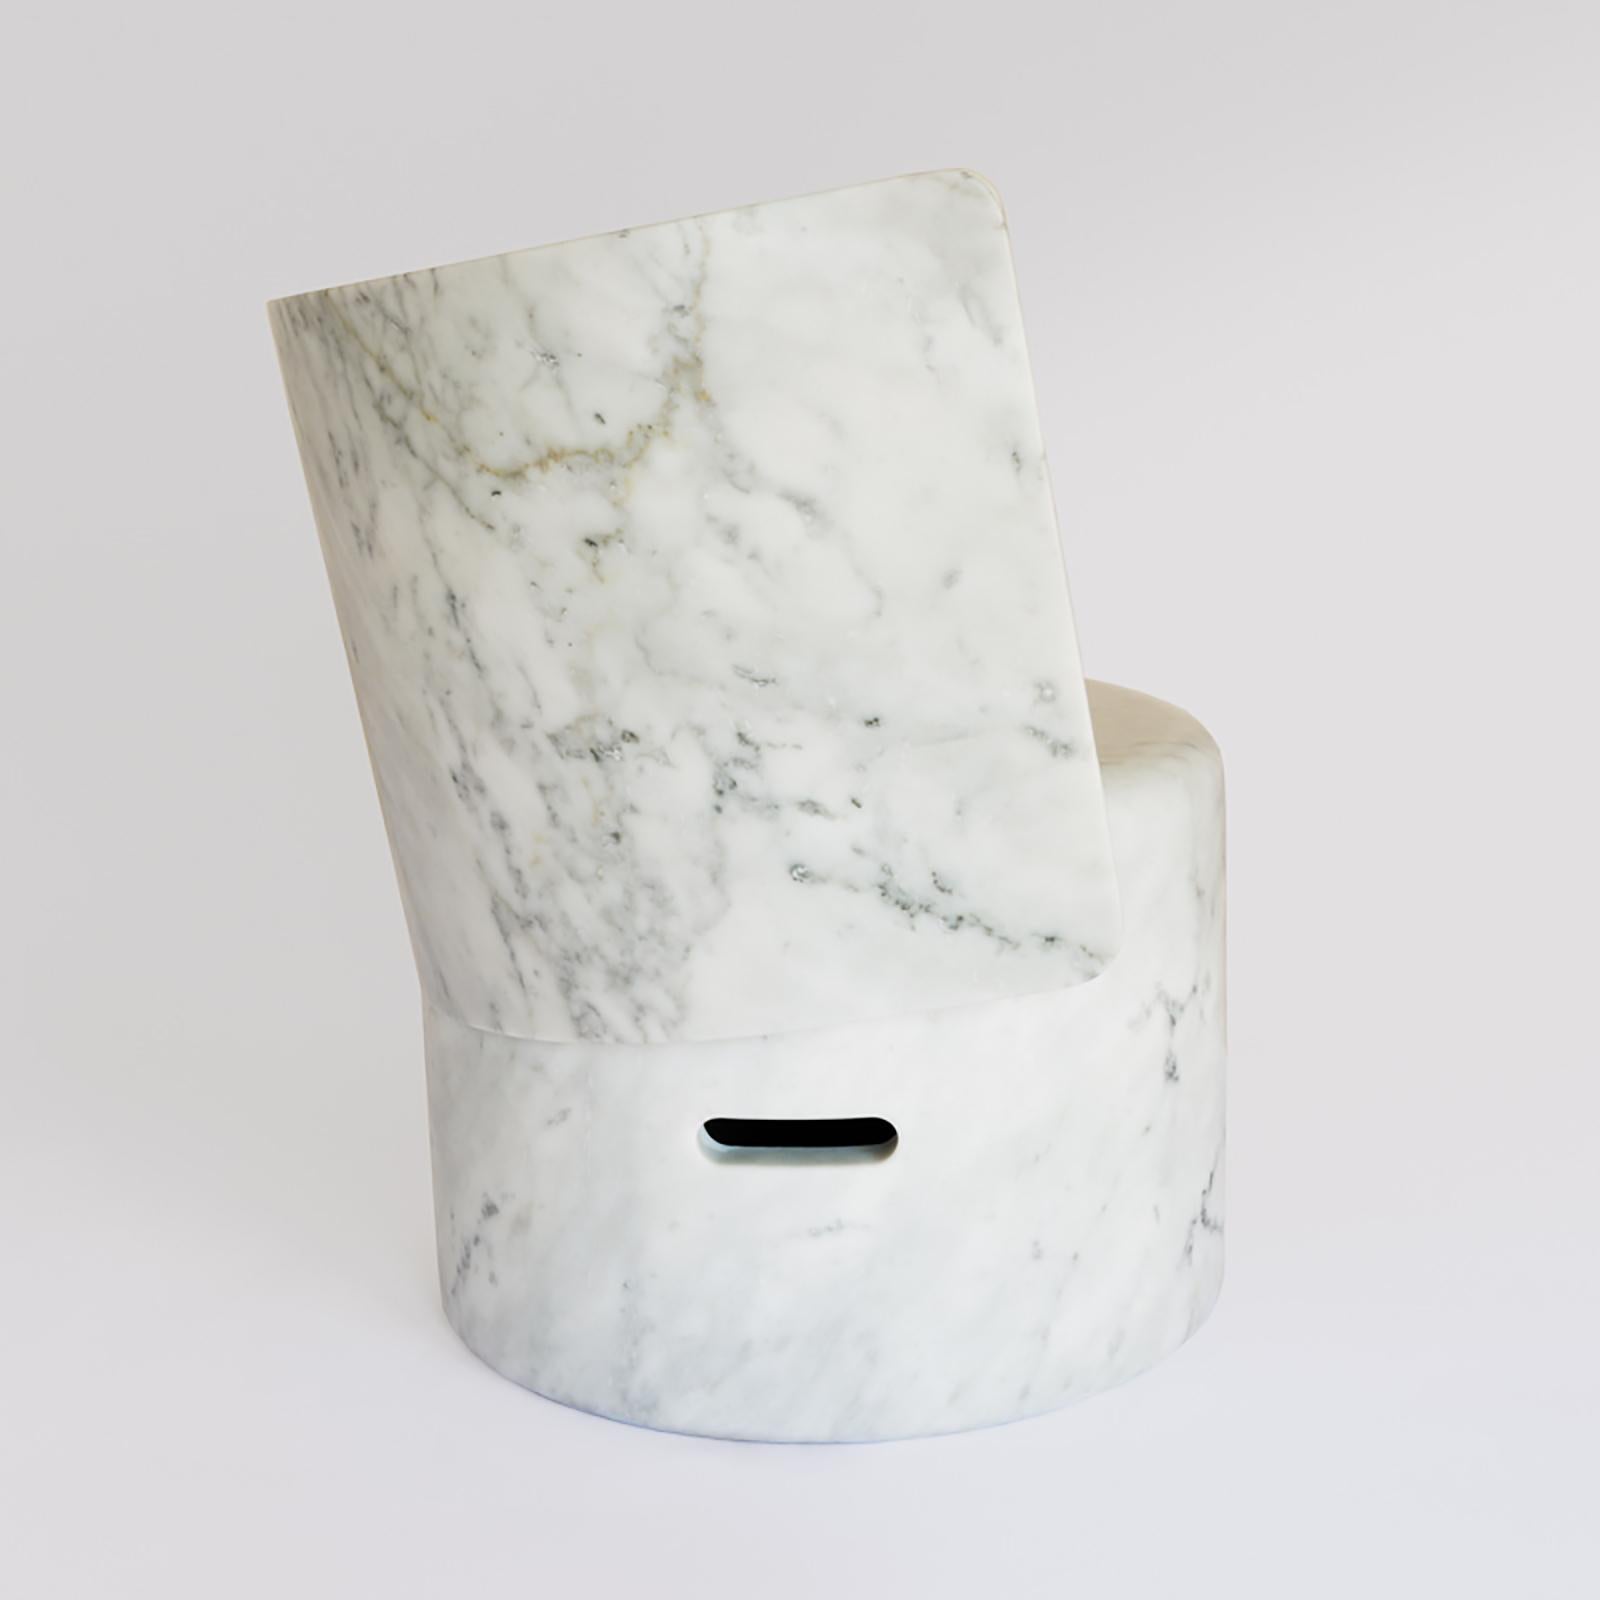 A normal slab of marble that gives the impression of yielding and bending in a gentle curve thanks to the ability and productive capacity of the company. The lines – and the combination of different stones – confer lightness of vision to the